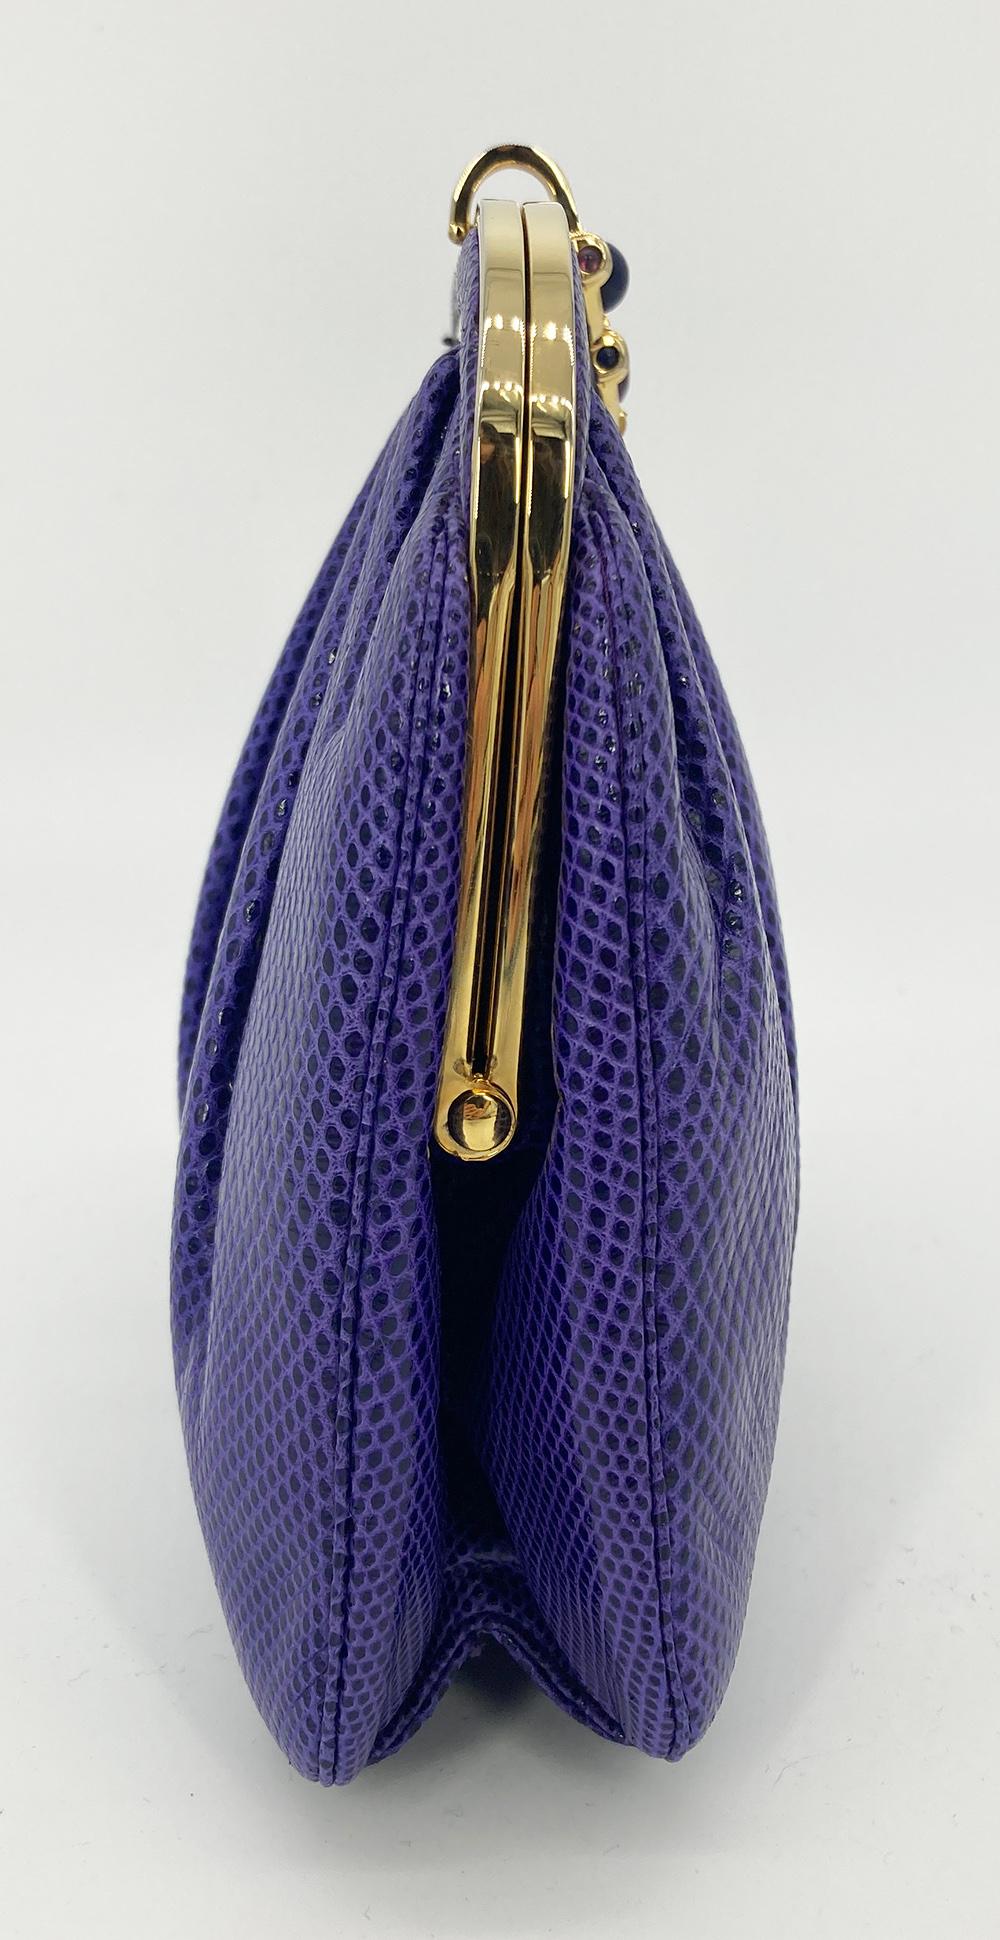 Vintage Judith Leiber Purple Lizard Clutch c1980s in very good condition. Purple lizard leather trimmed with gold hardware and a lapis and quartz gemstones. Top lift latch closure opens to a purple nylon interior with one zip and one slit side